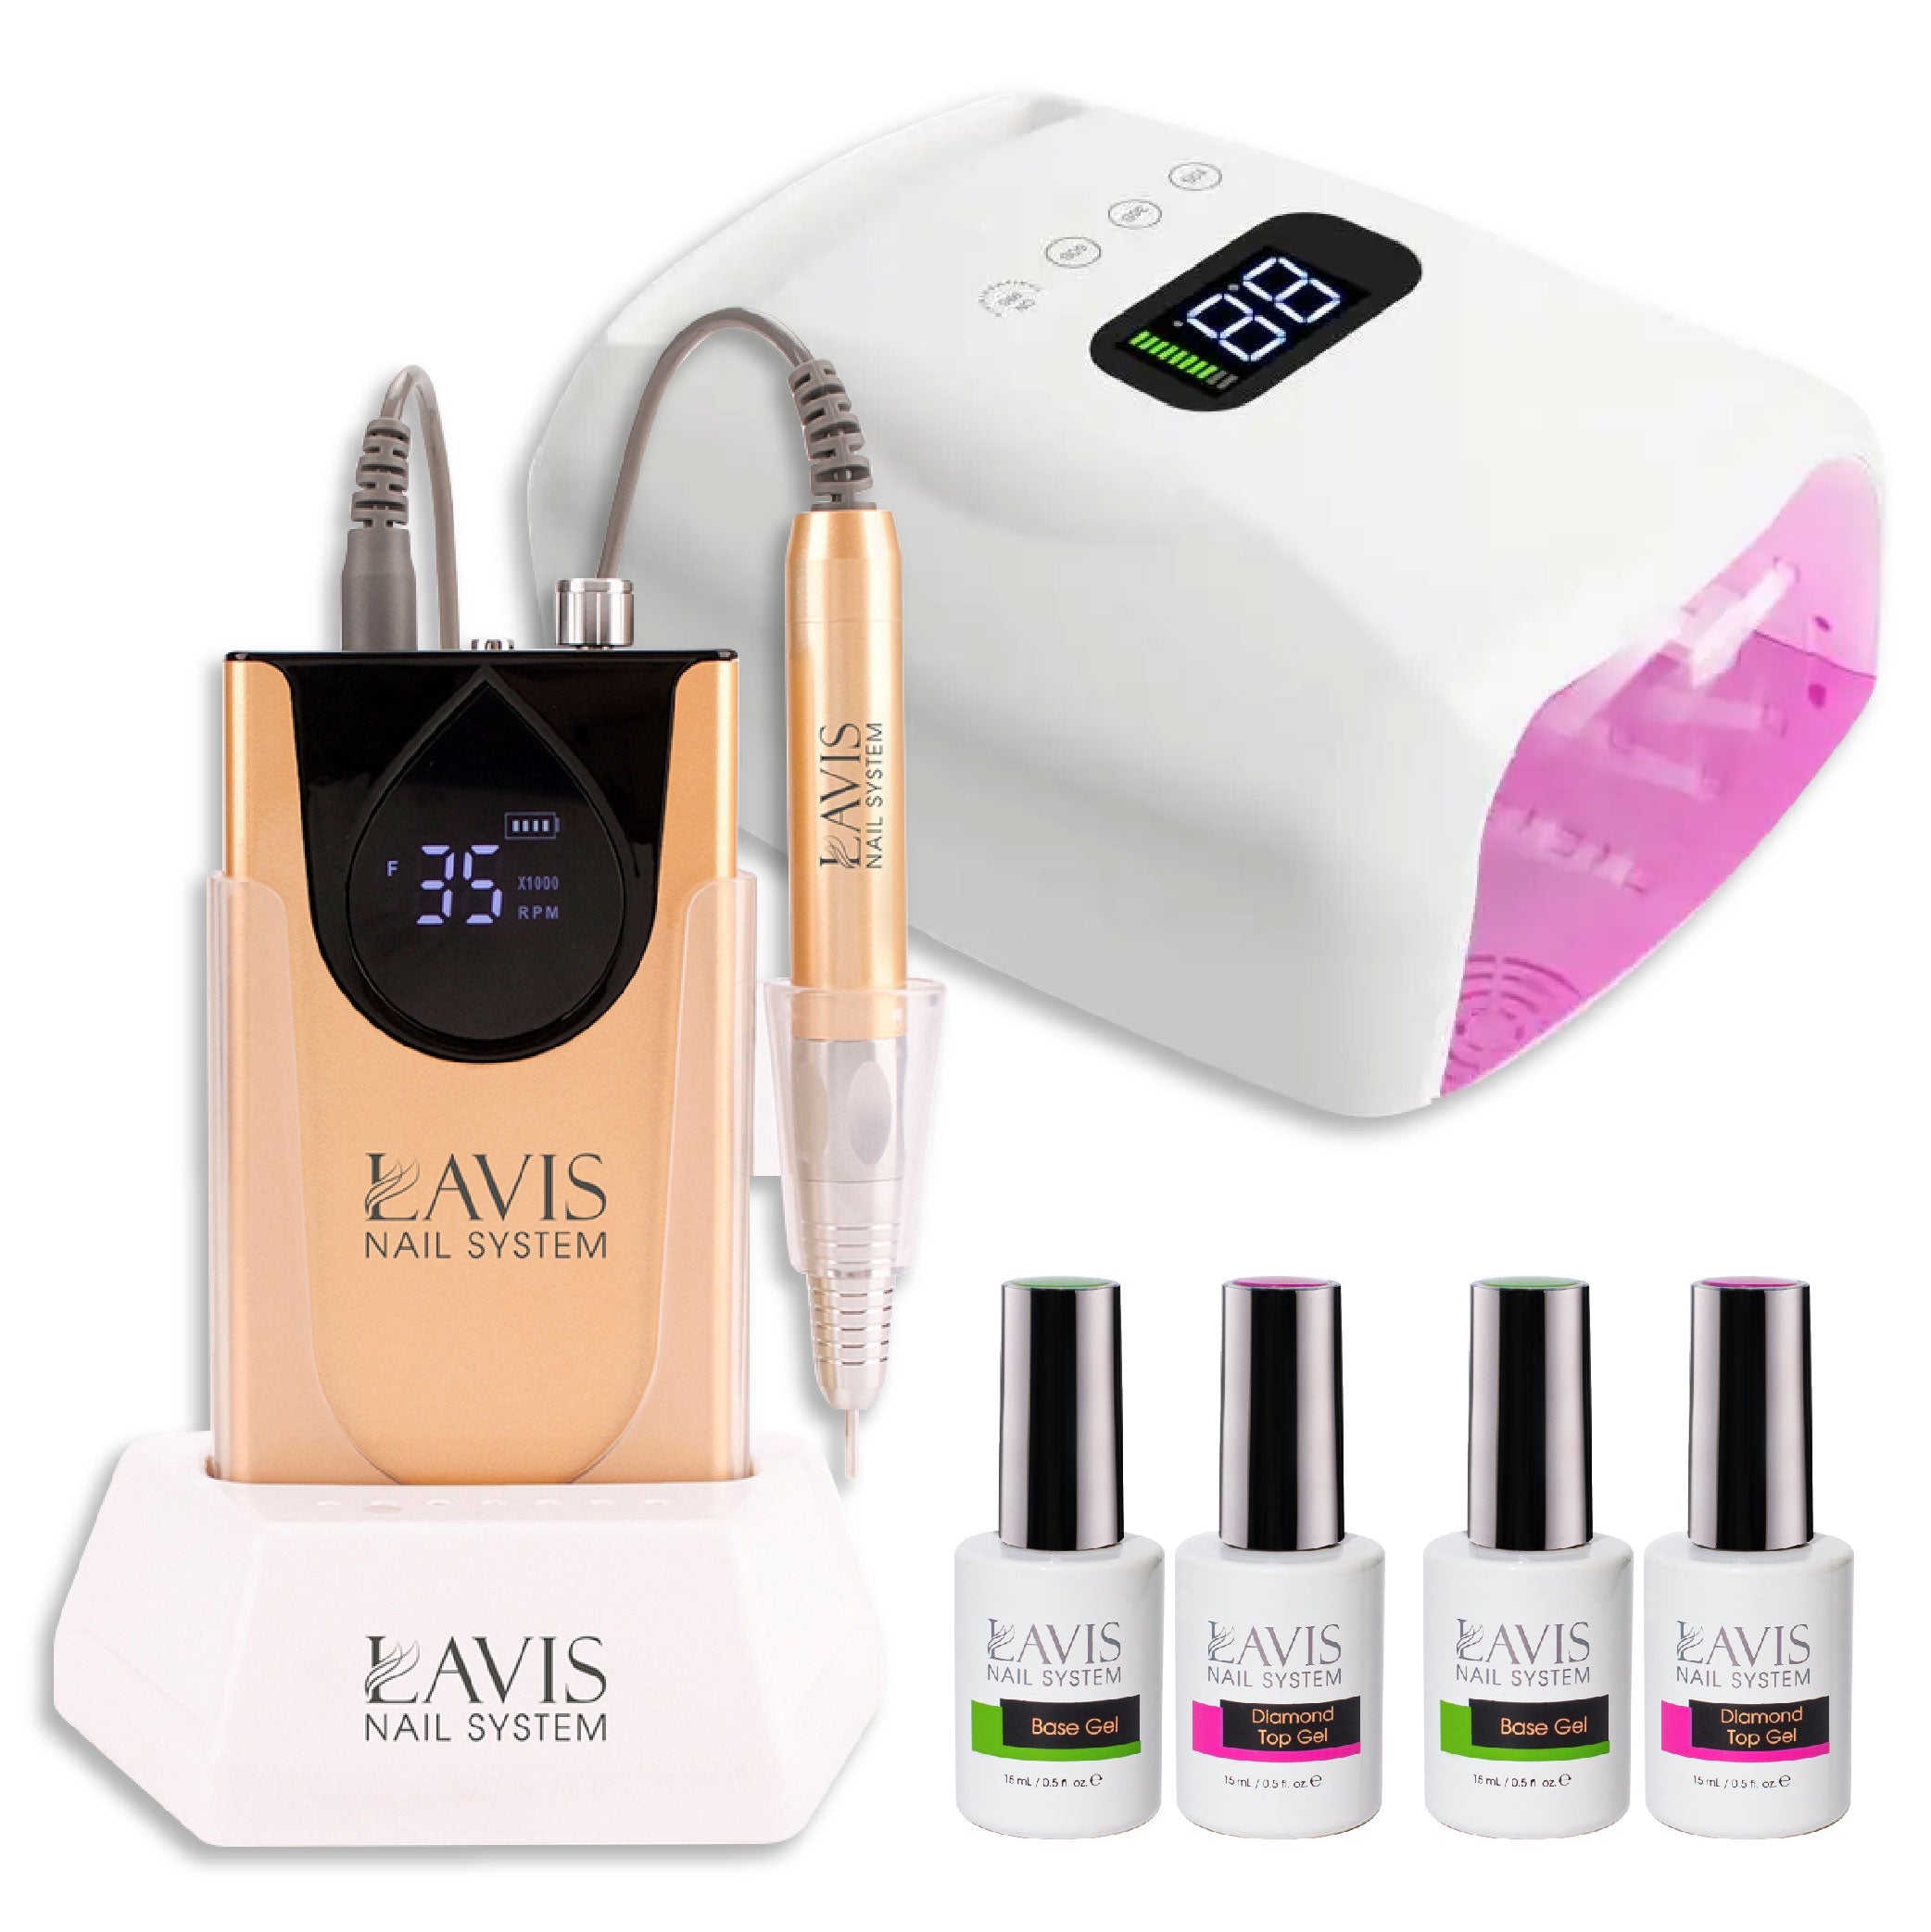 1 Lavis Nail Drill & 1 Lamp Rechargeable Cordless LED/UV Nail Lamps 96W - Gold